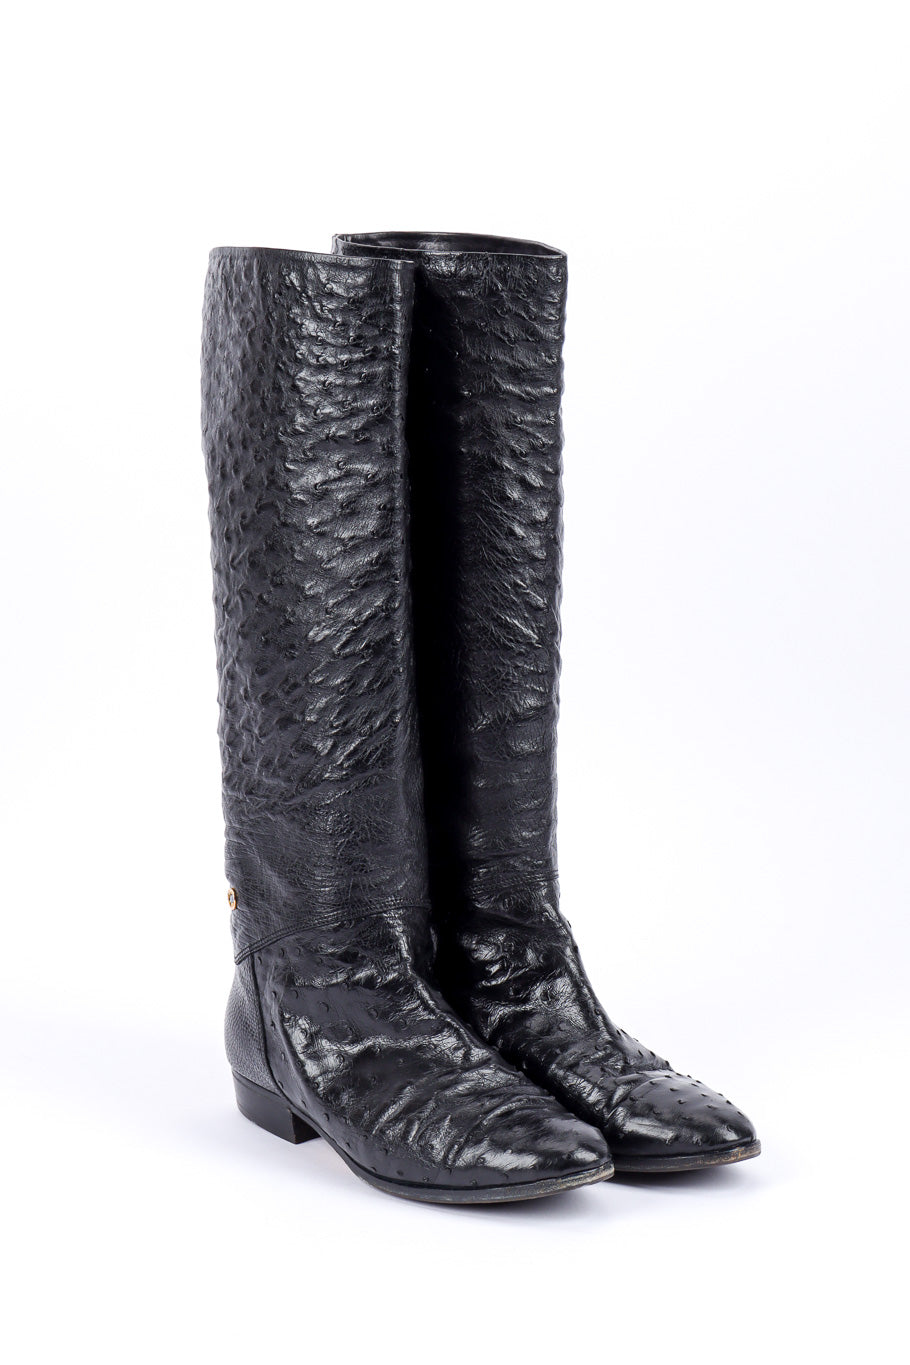 Vintage Gucci Black Ostrich Leather Riding Boot 3/4 front view @recessla